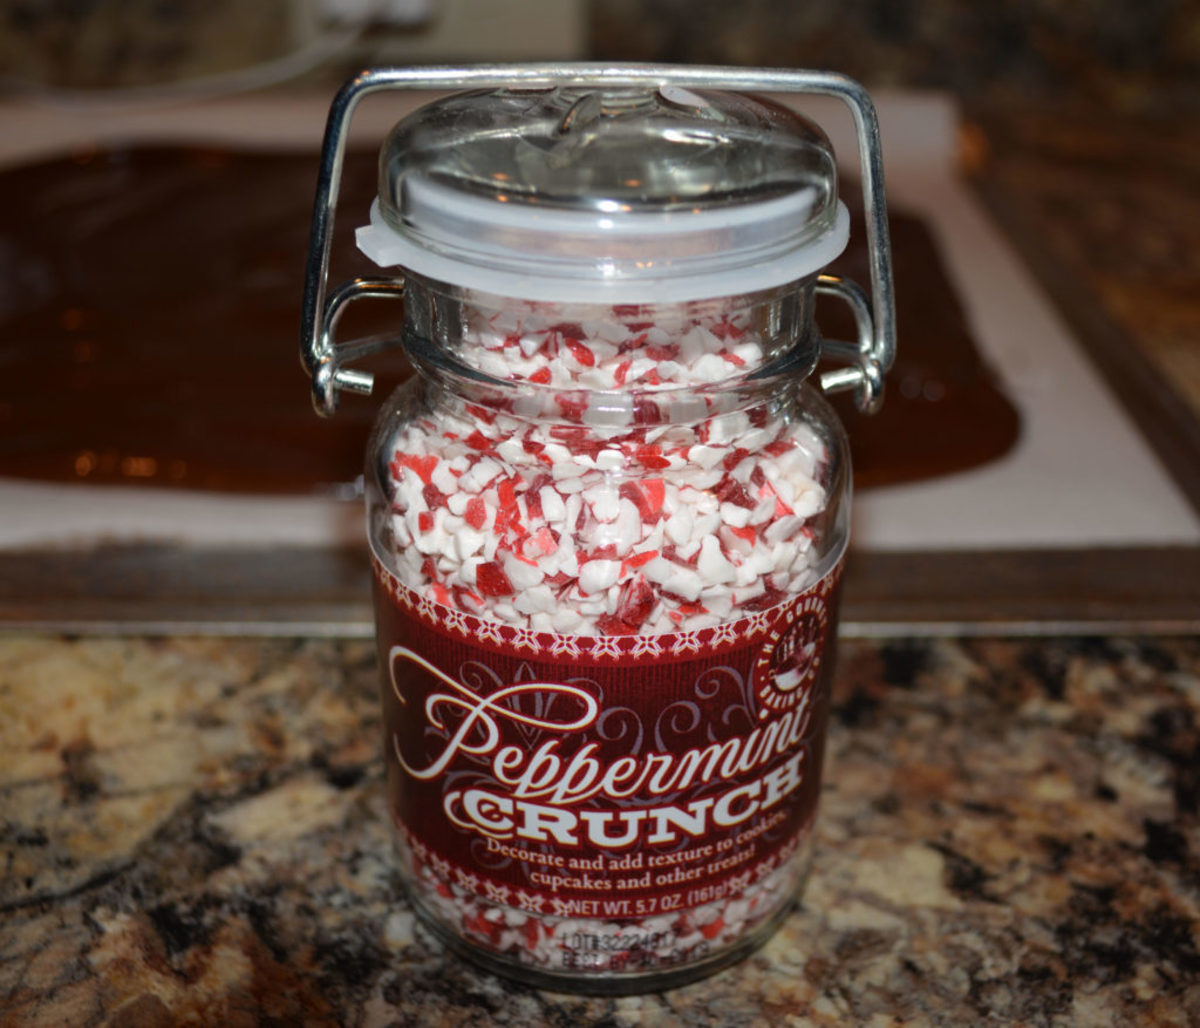 For a few years we used this pre-crushed peppermint that came in these cute little jars. For 2021, the jars were smaller and not cute -- just ordinary jars with a screw on lid. They also cost more. So we found a different source of peppermint.